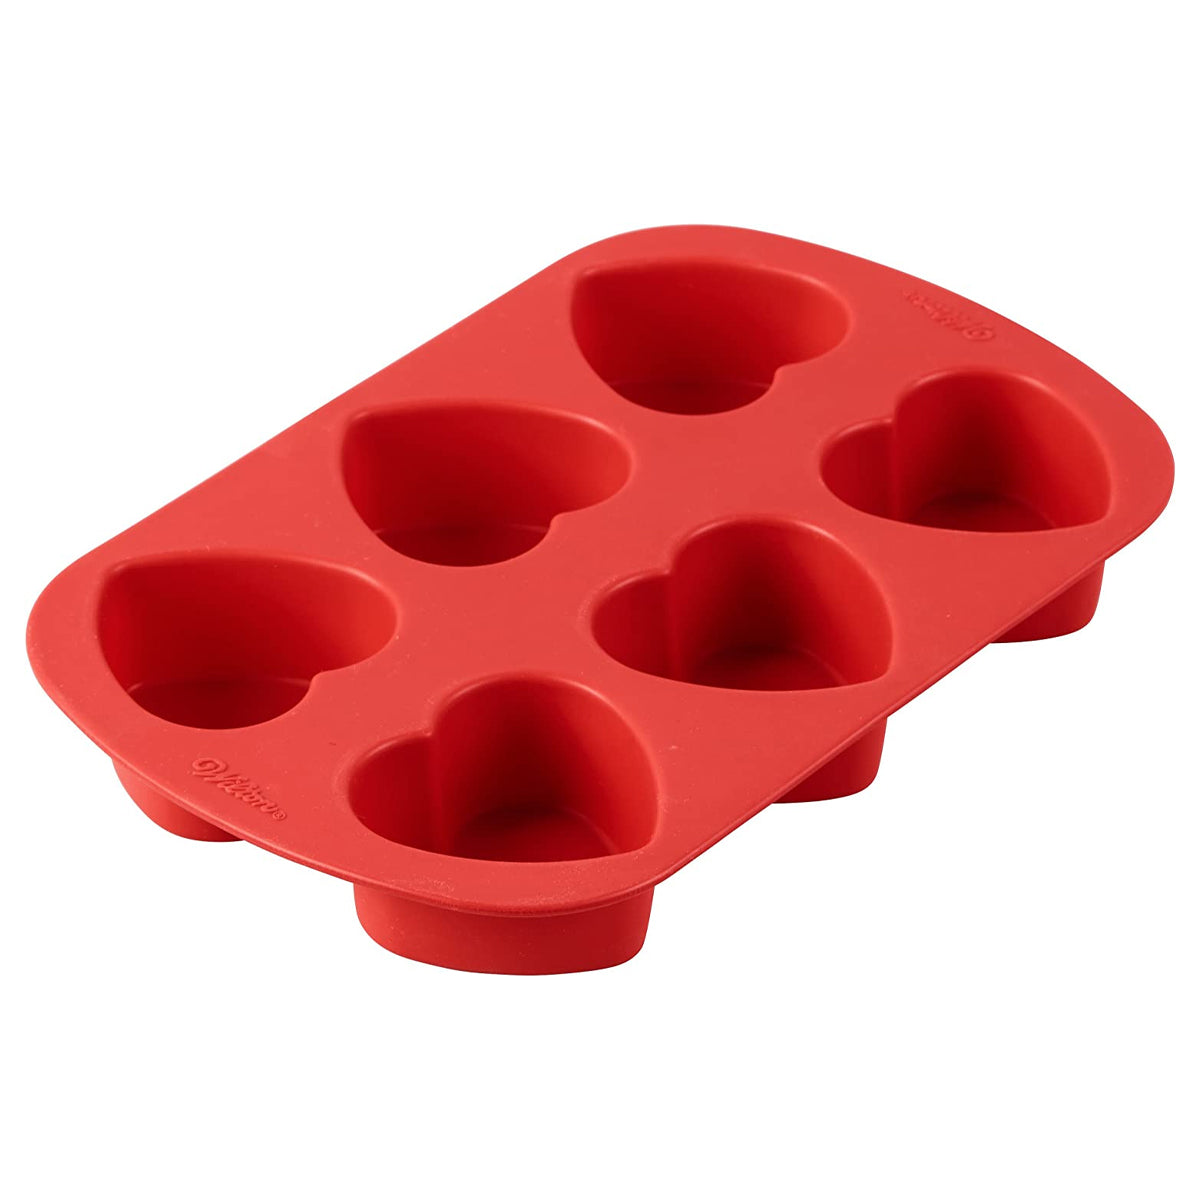 Wilton Silicone Heart-Shaped Mold – For Cakes, Cookies, Candies